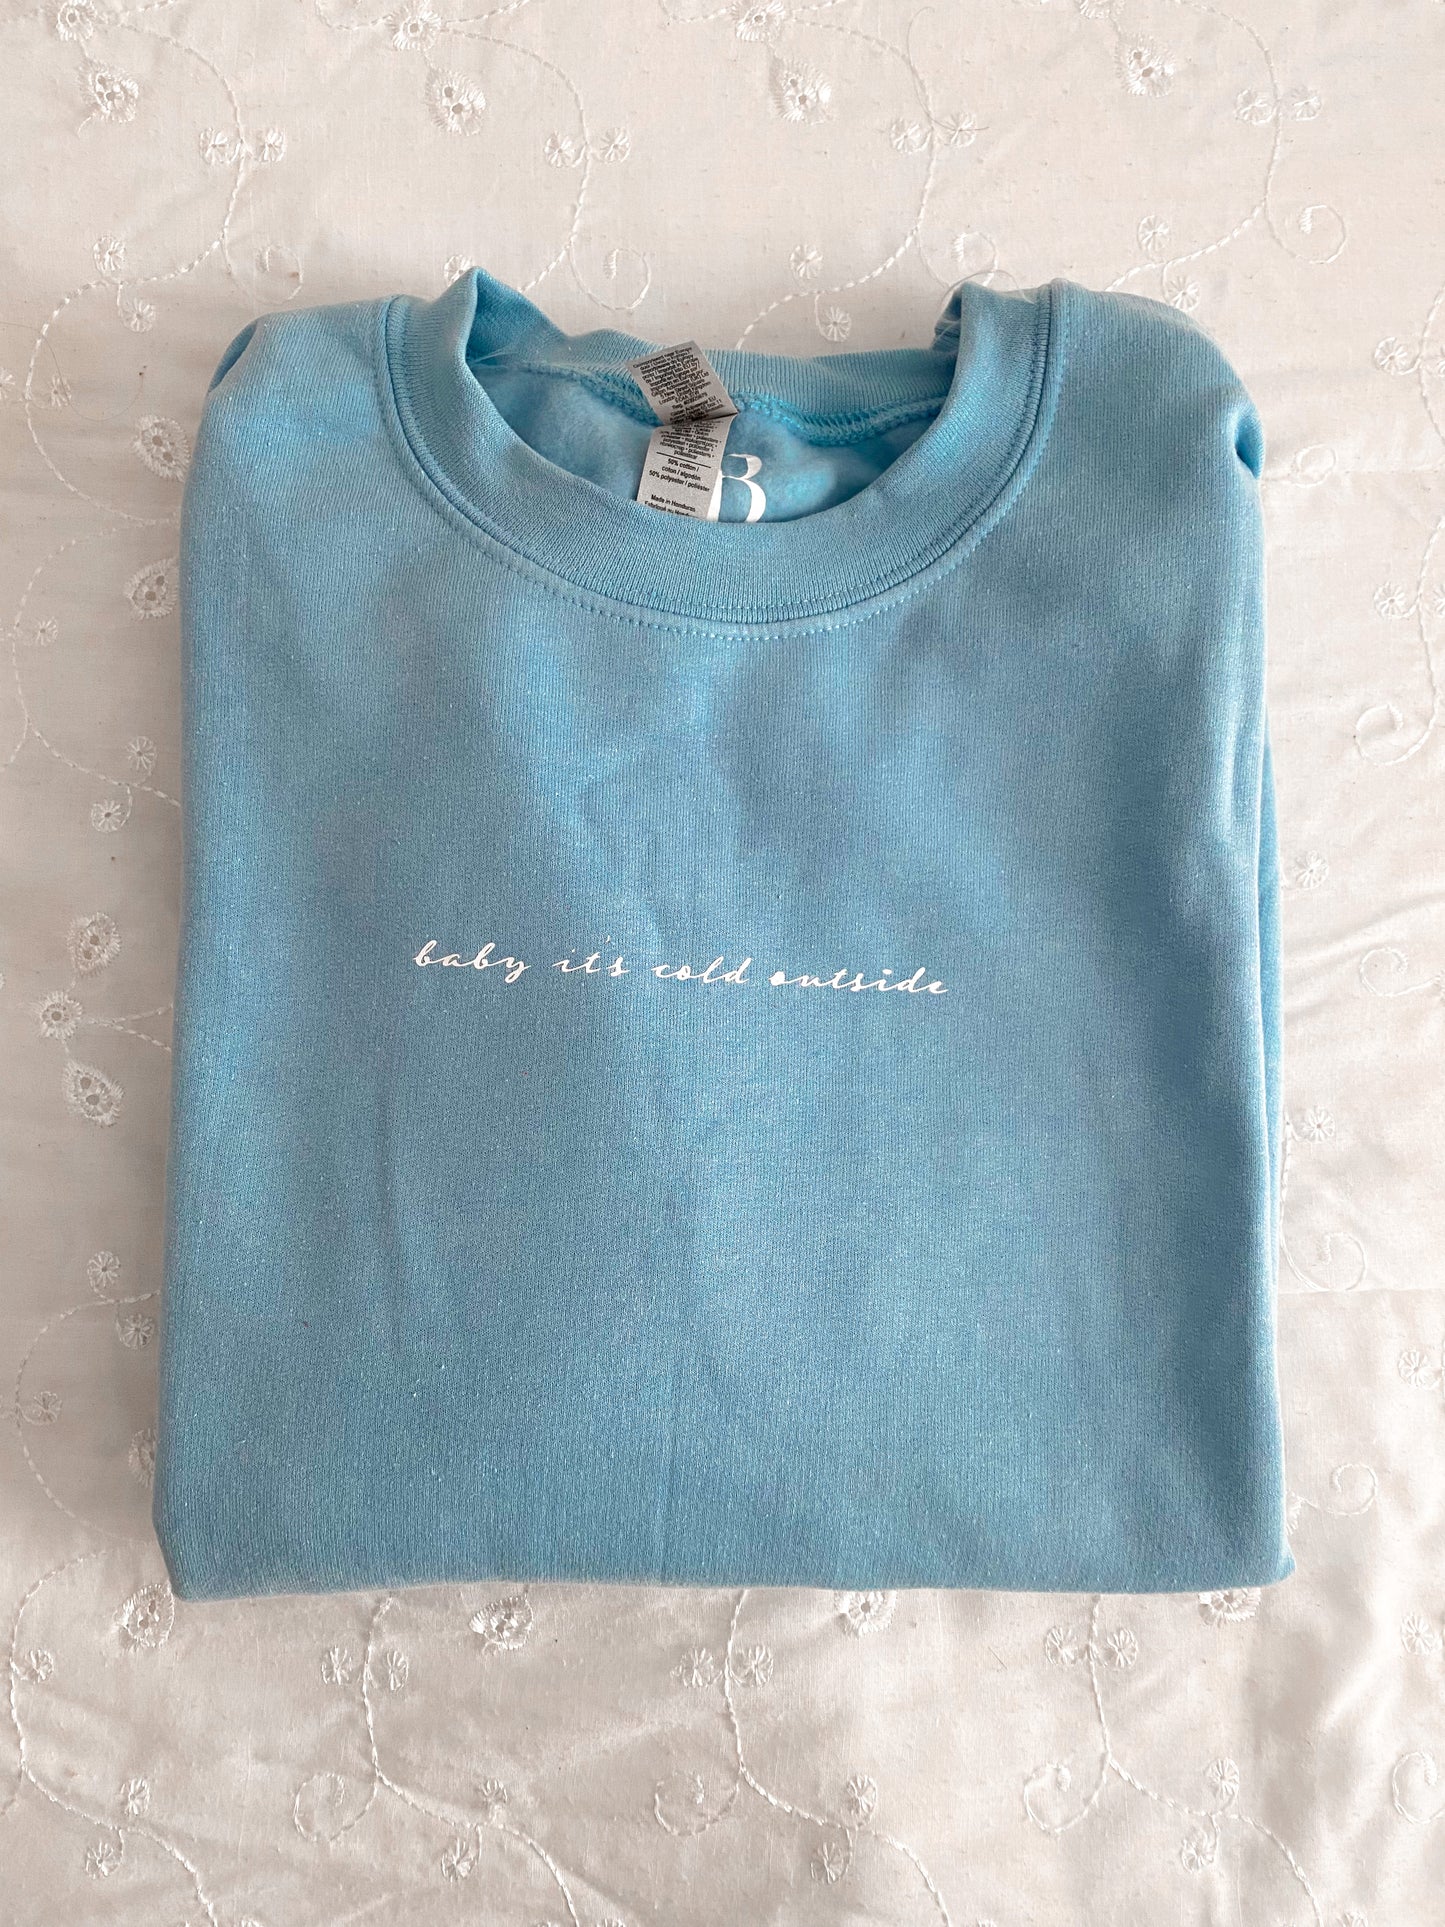 Baby it's Cold Outside Crewneck